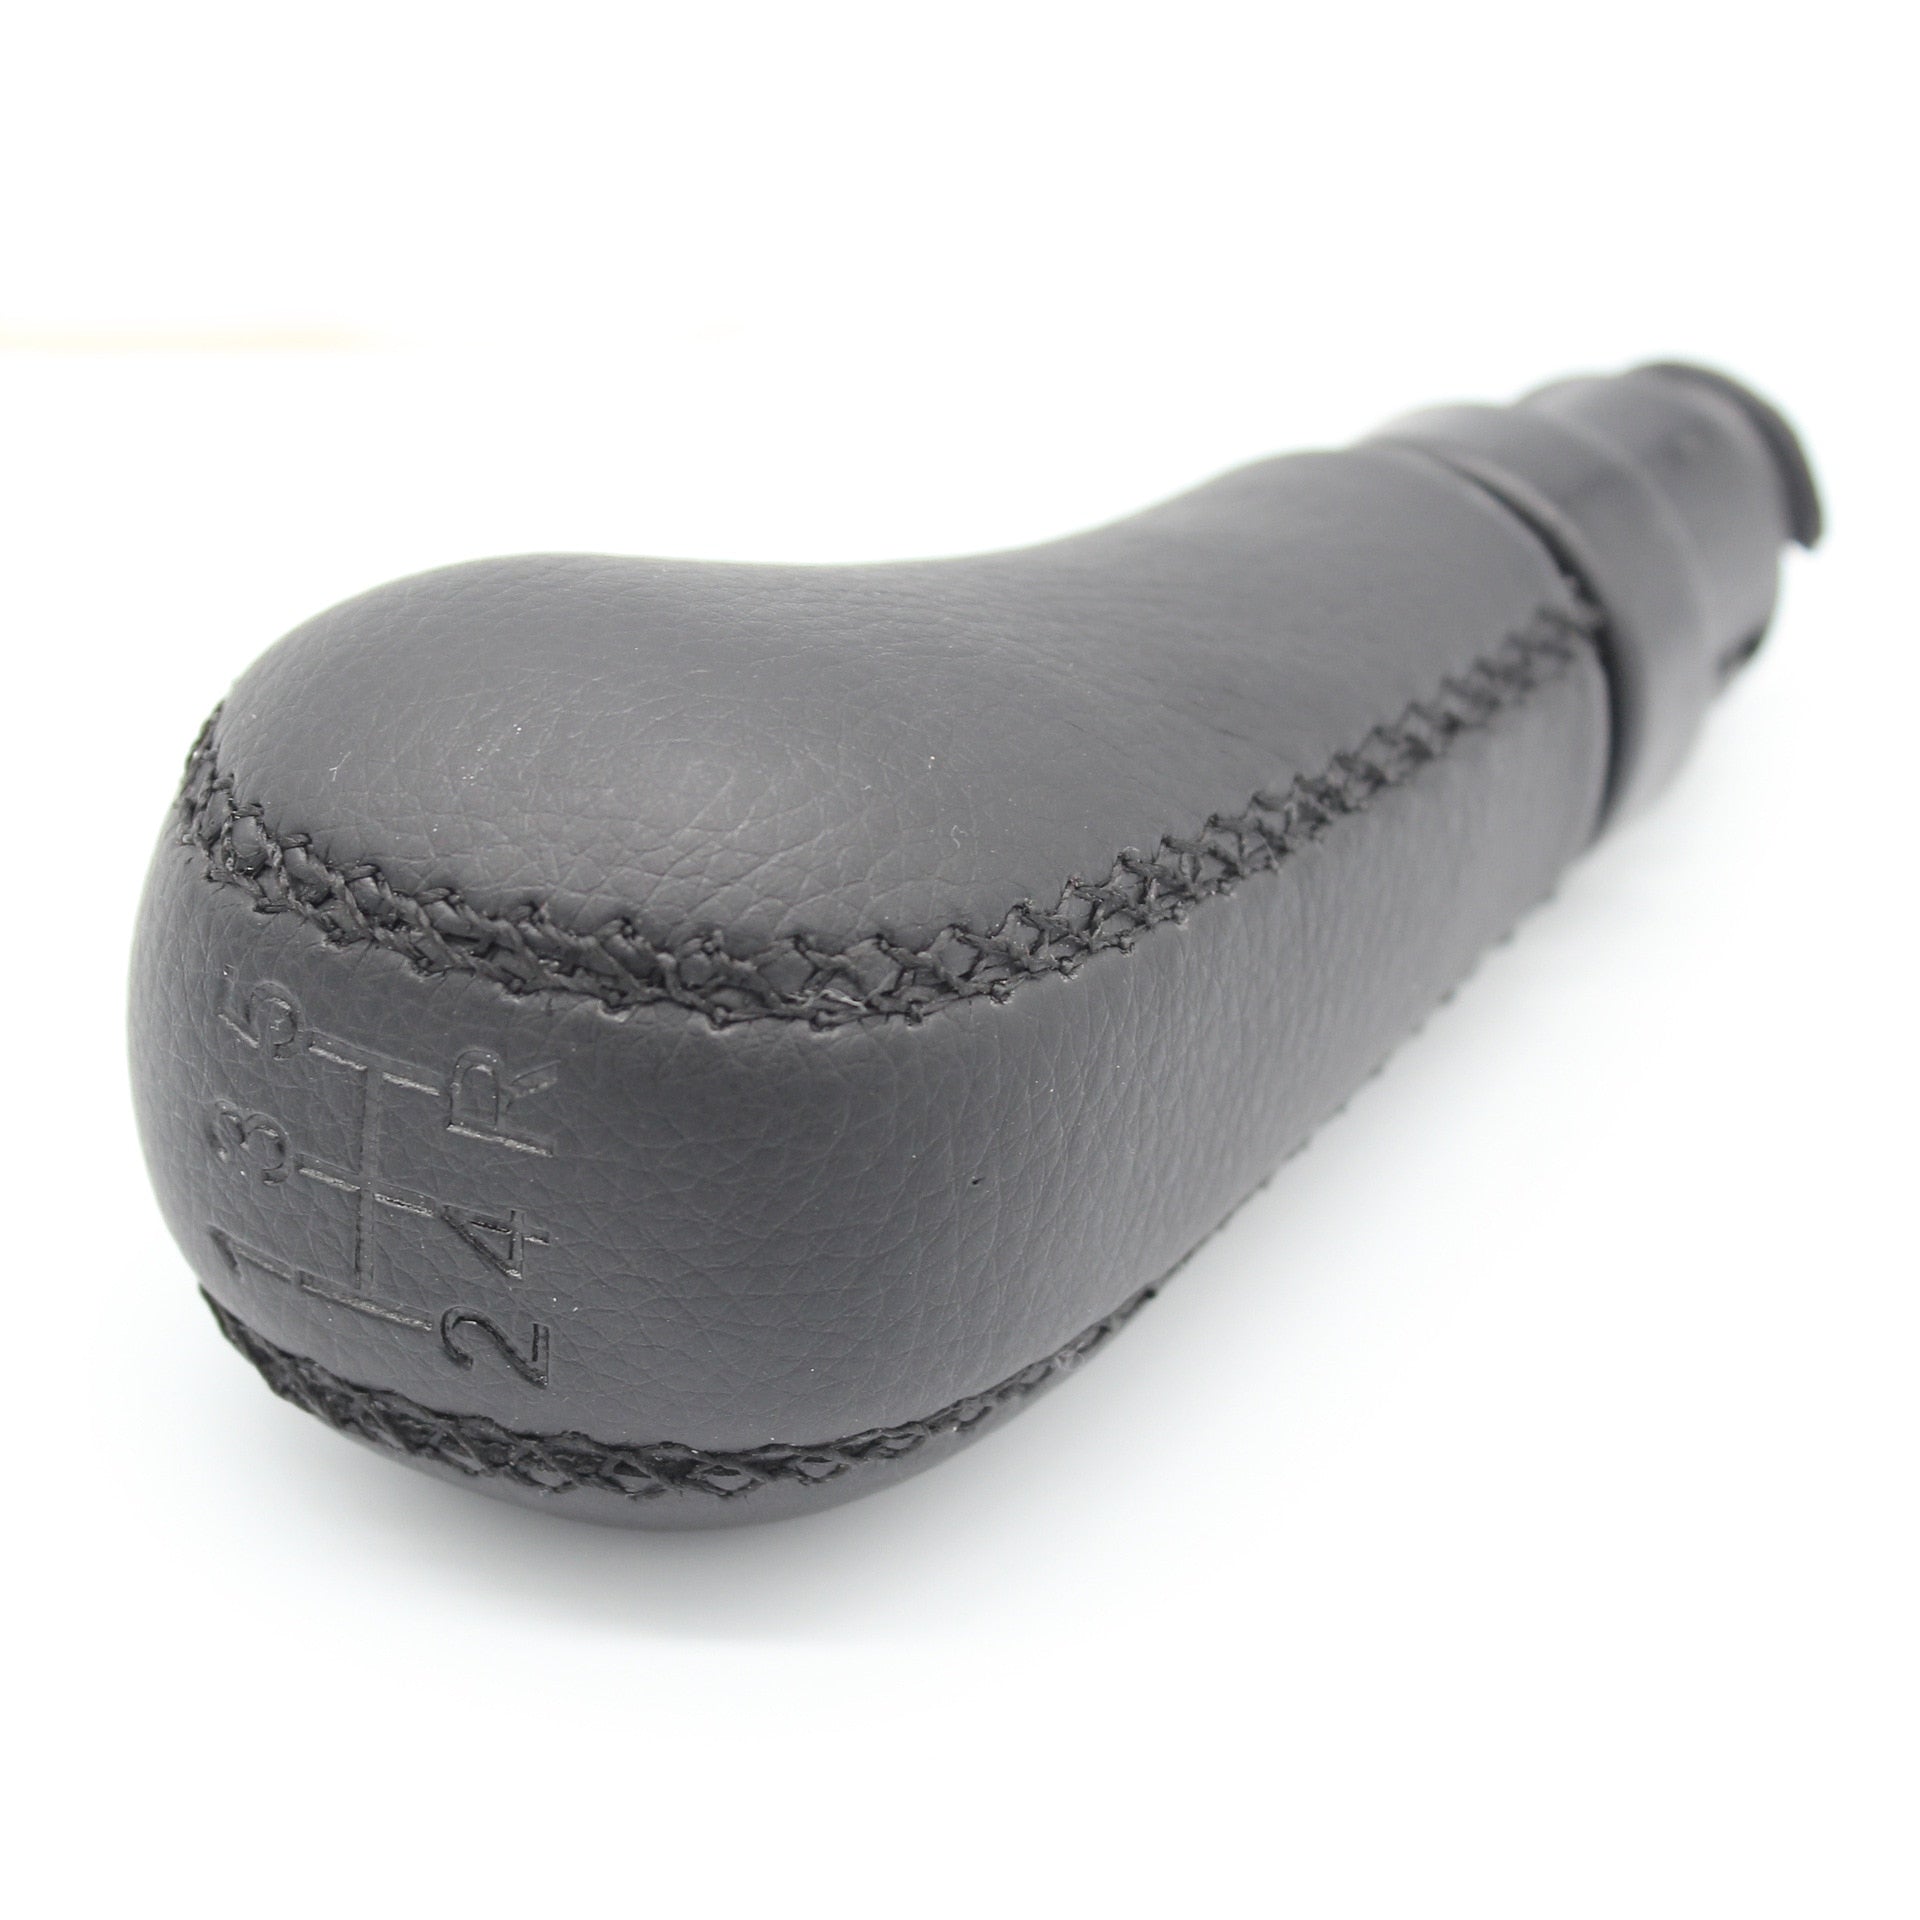 Car gear shift knob for Volvo S60 S80 V70 XC70 sewing leather 5 / 6 manual shift lever handball